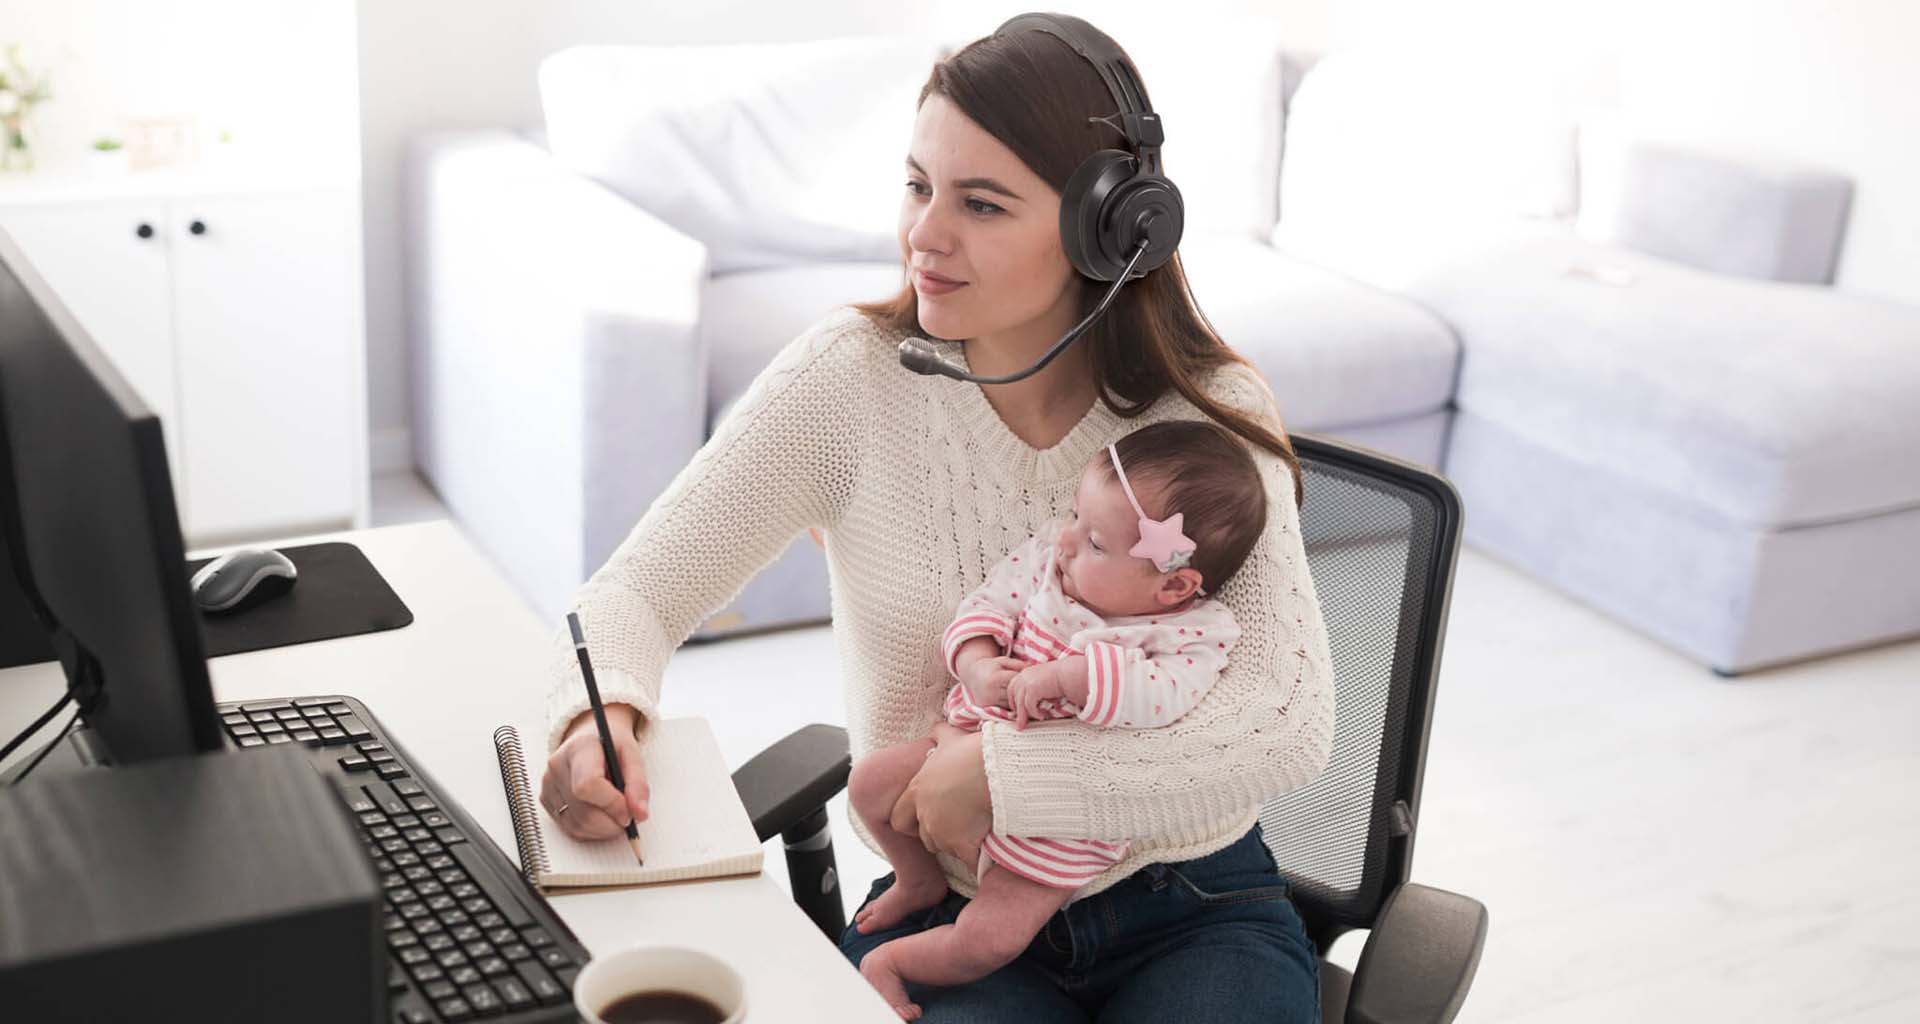 Your Call Center Business Continuity Plan: How to Shift to WFH